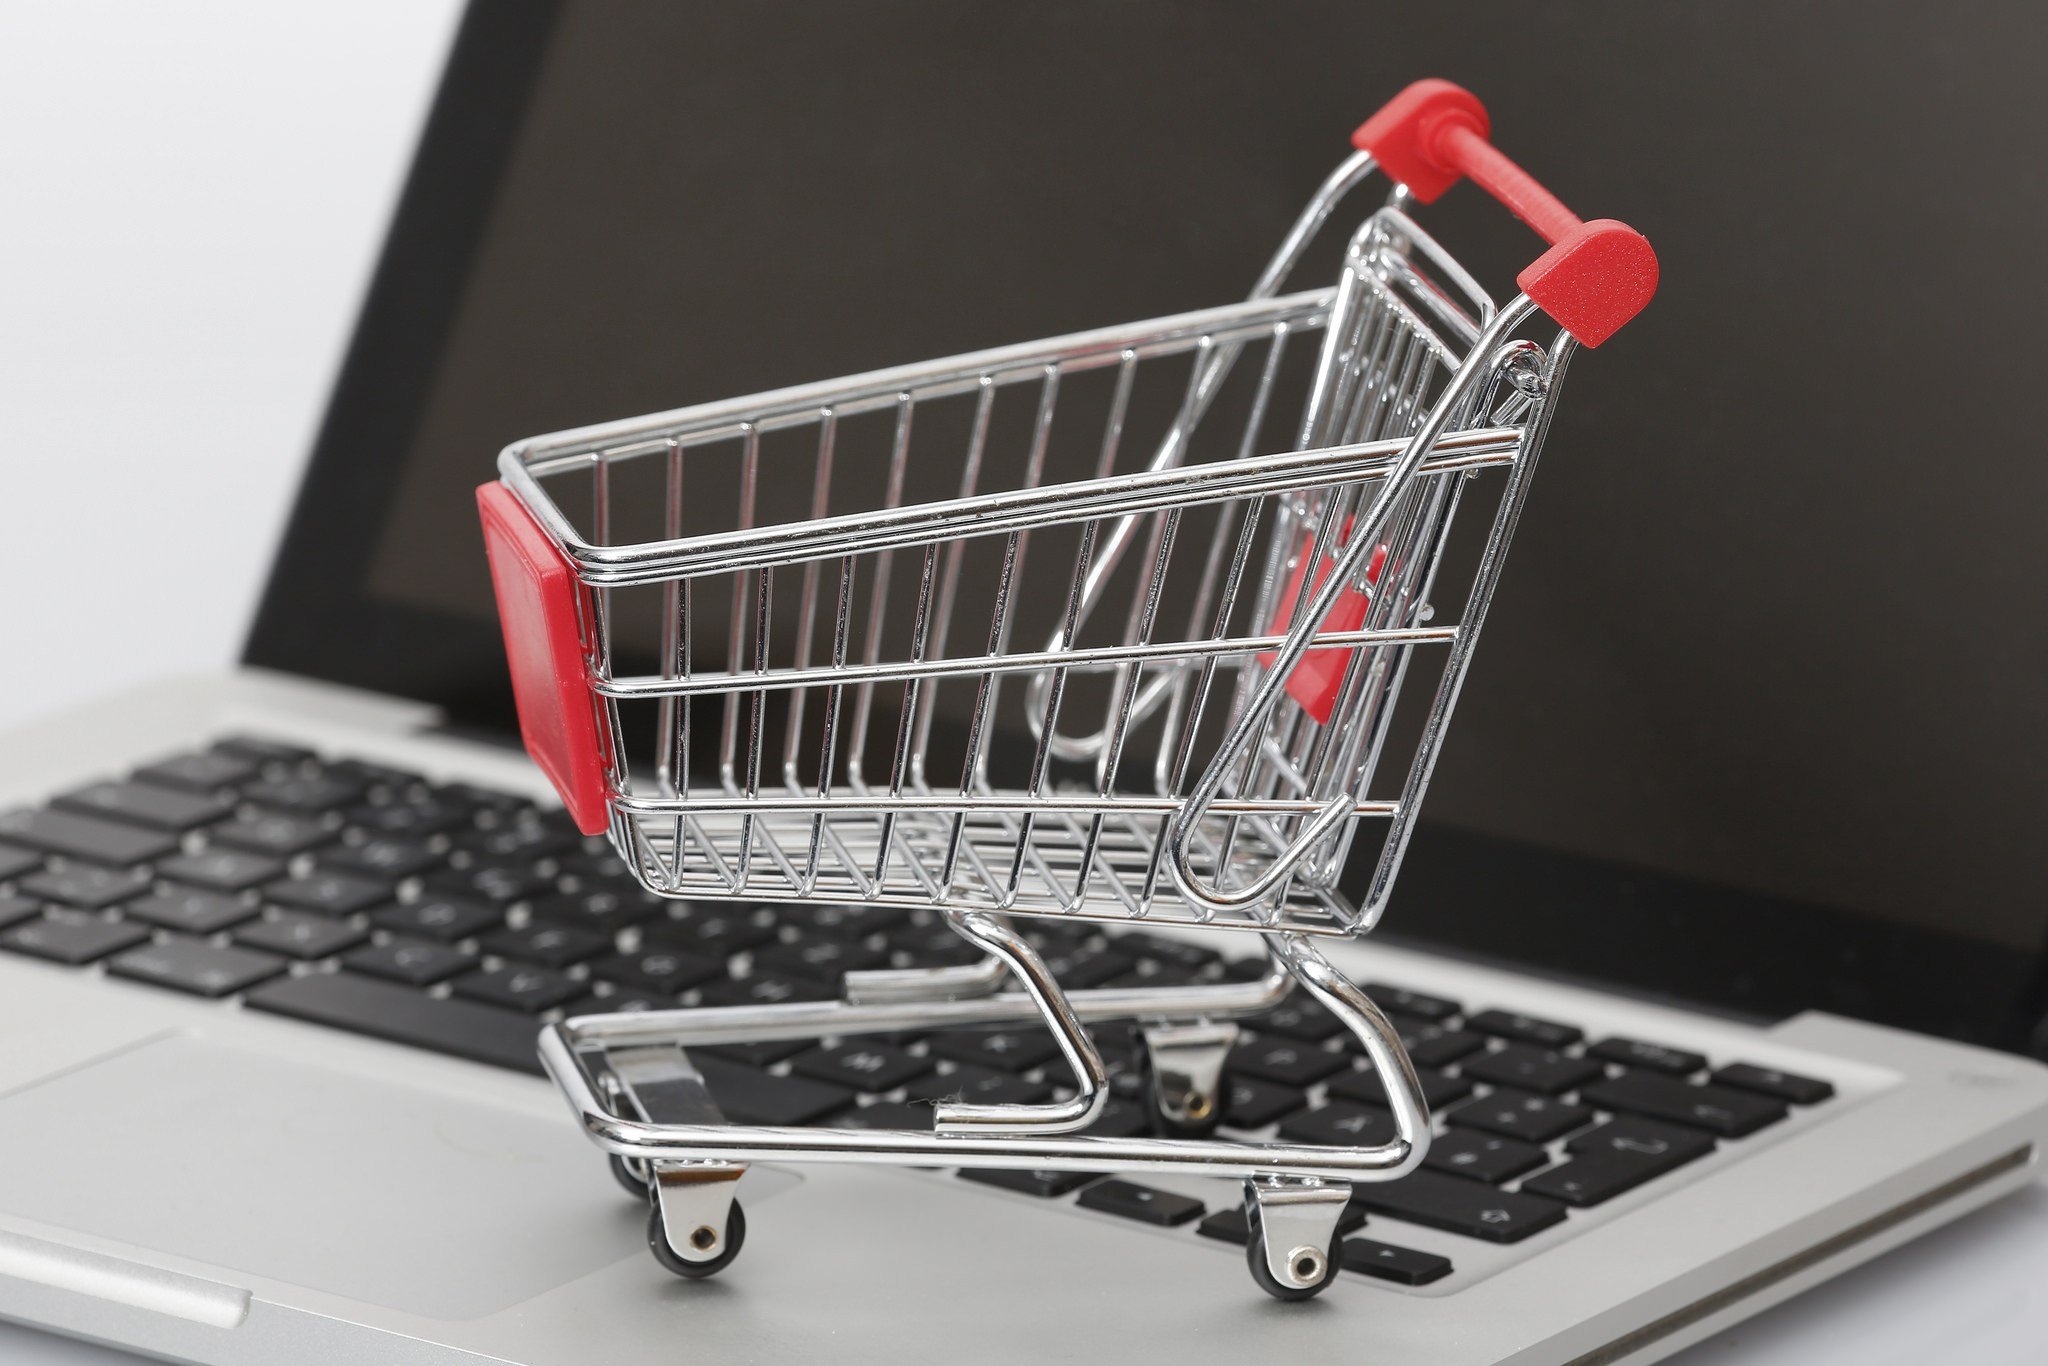 10 Online Shopping Tips To Save Money While Scoring Major Discounts